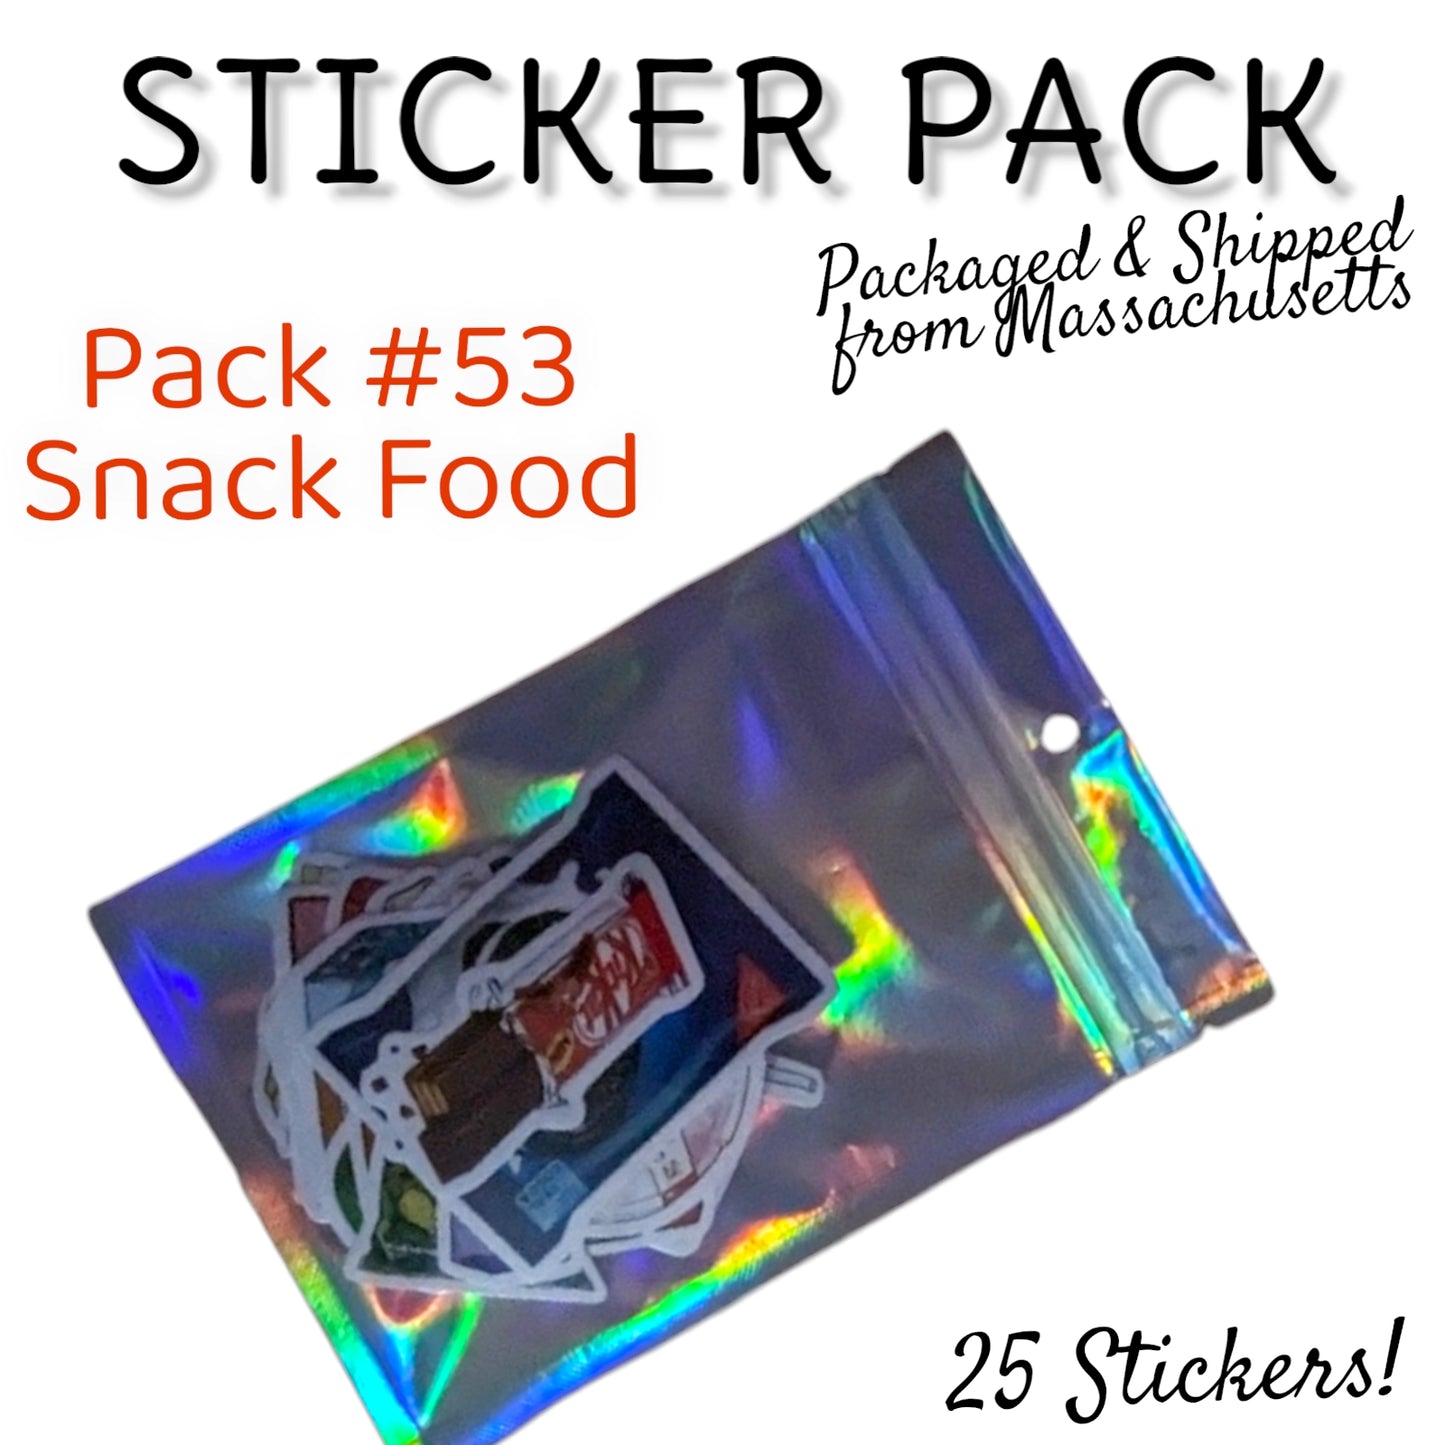 STICKER PACK - Pack #53  - 25 Pieces - Snack Foods